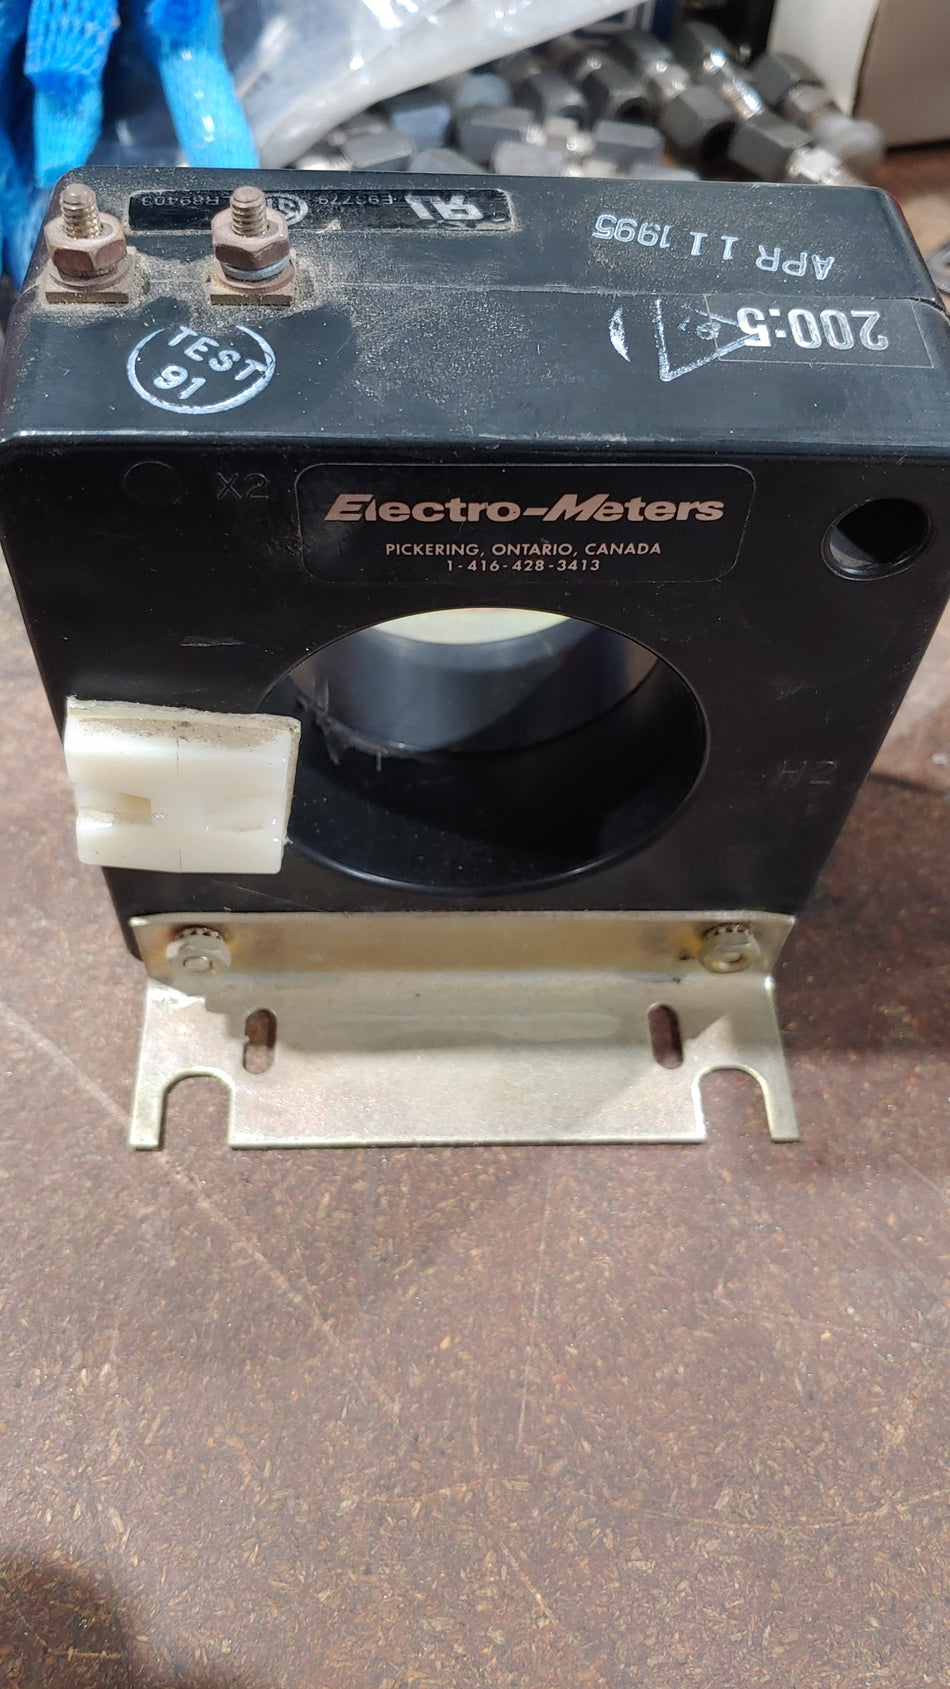 Electro Meters Cat 180SHT-201Current Transformer Ratio: 200:5 A, Single Phase, 10 kV BIL, 60 Hz, Single Ratio, Metering Class: 0.6 B0.2, Rating Factor: 1.33 "Used"